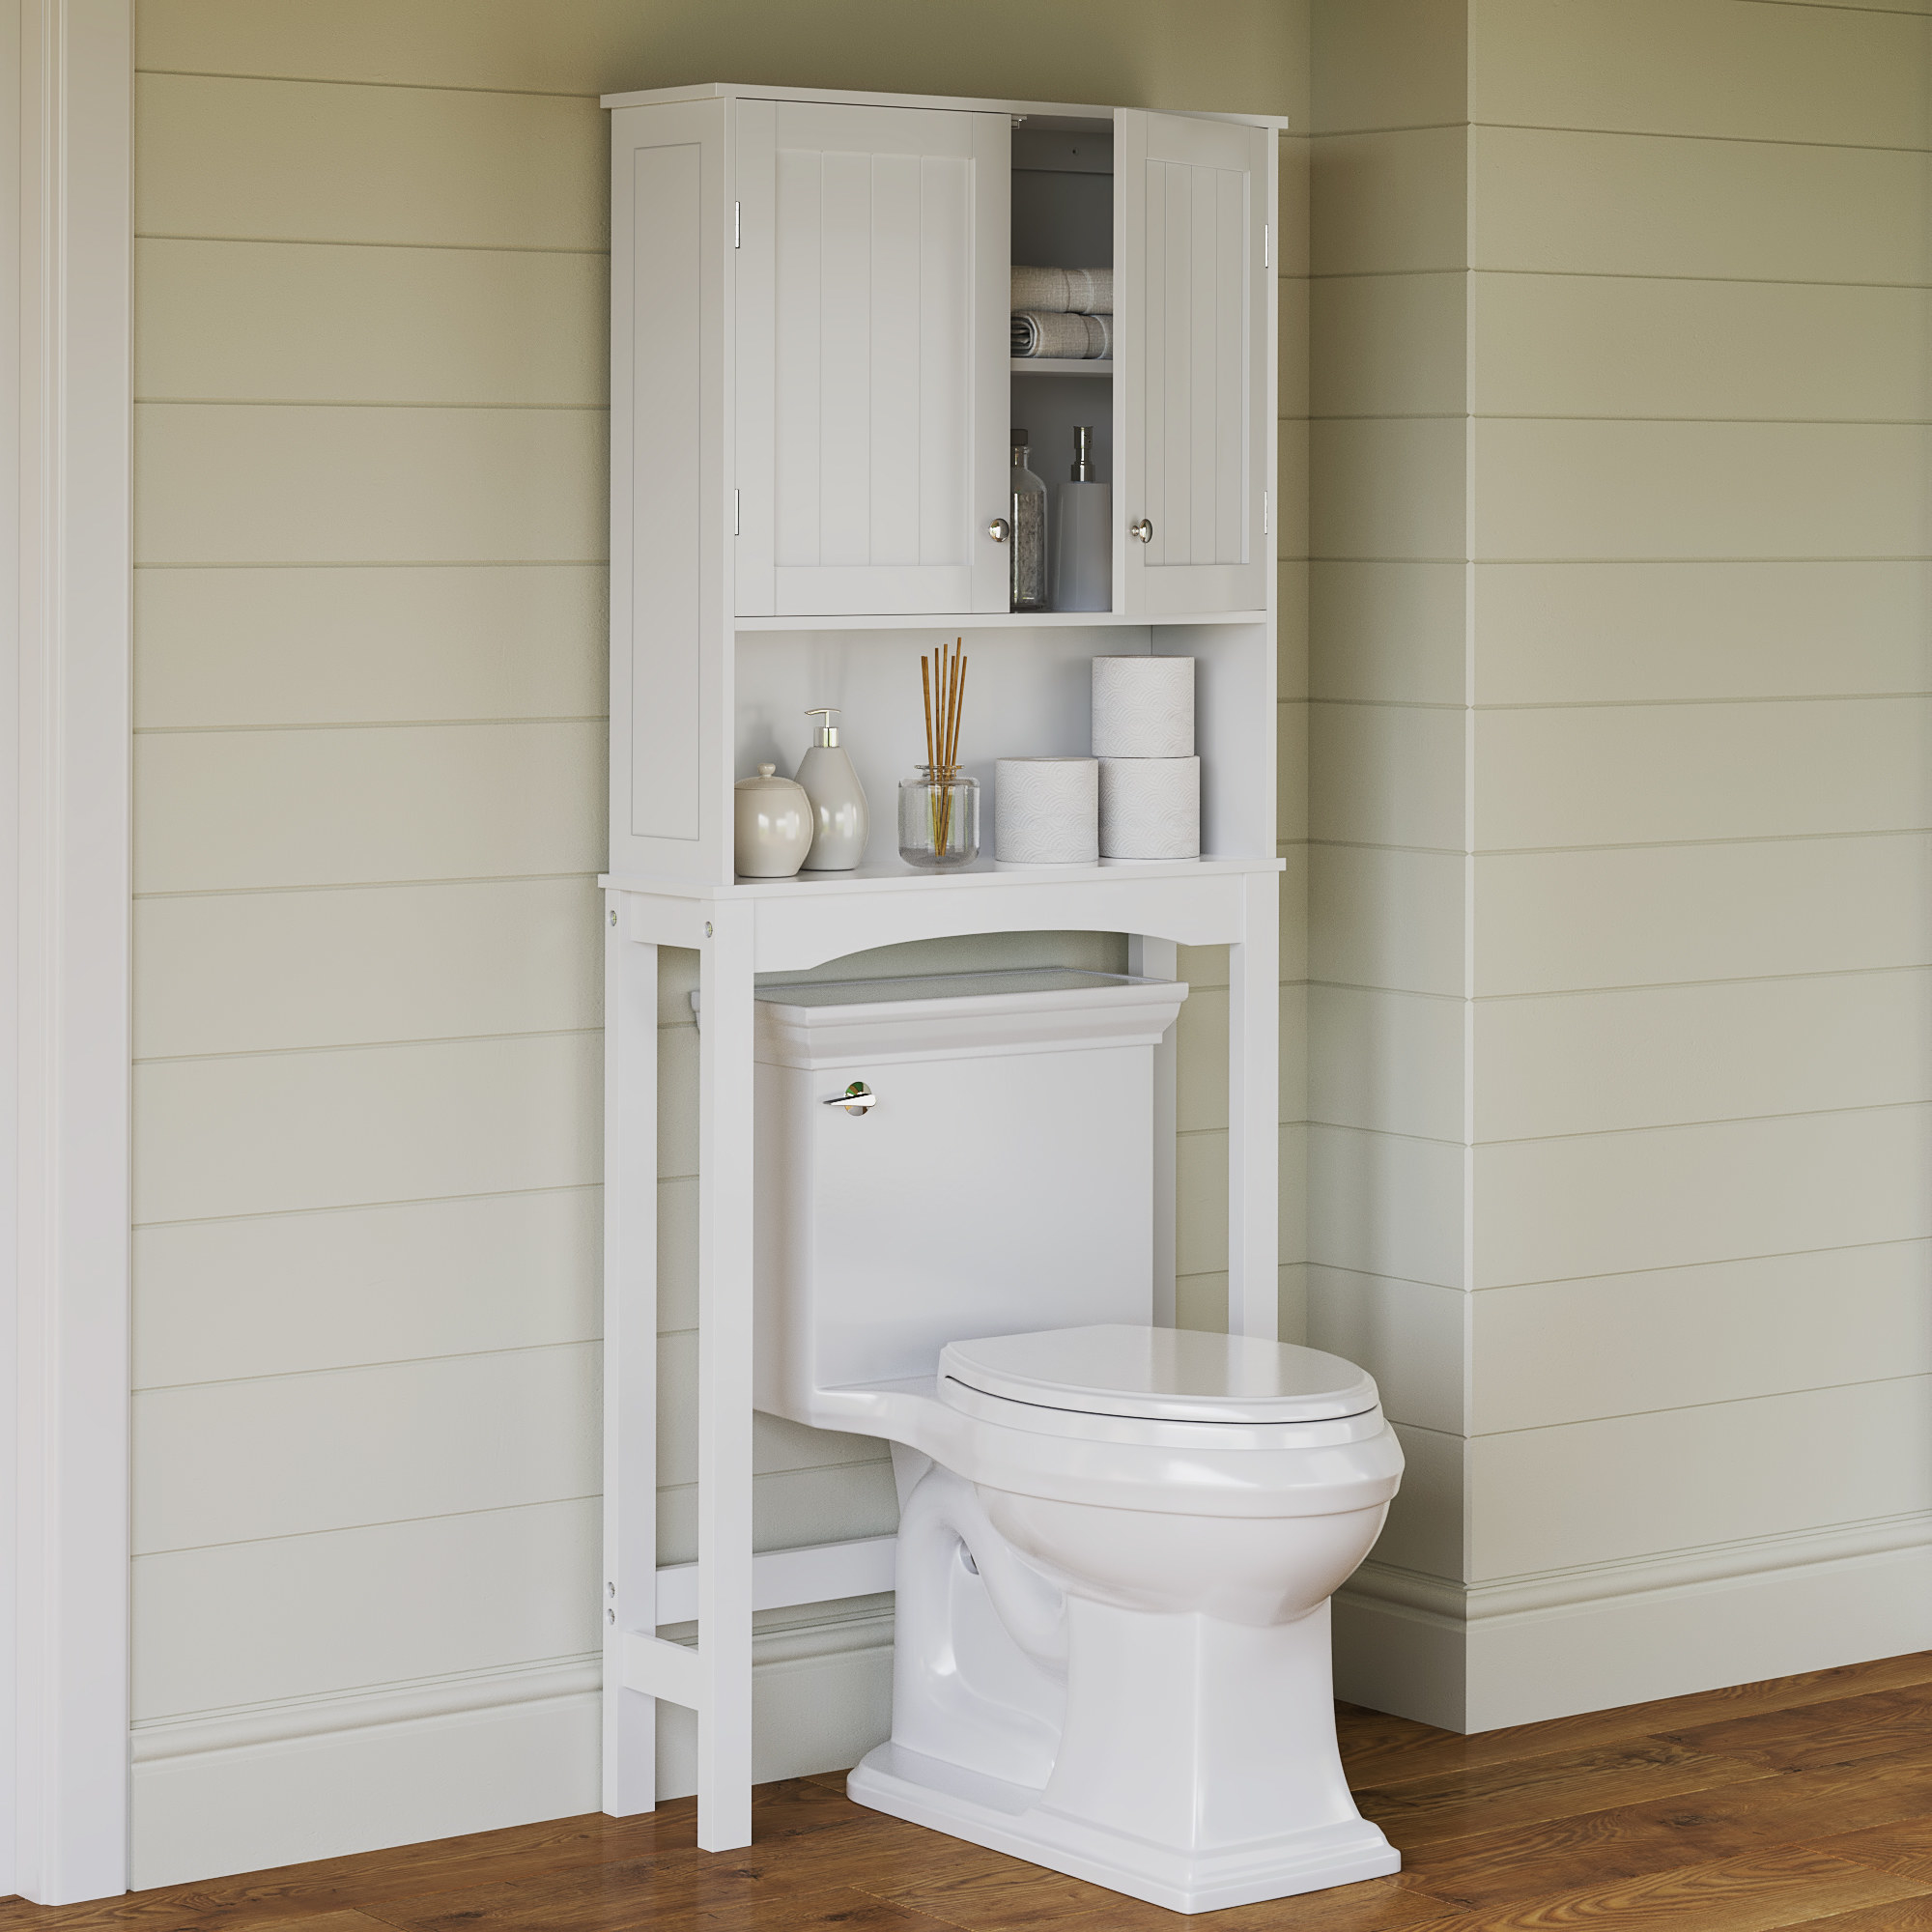 the white storage cabinet placed over a toilet